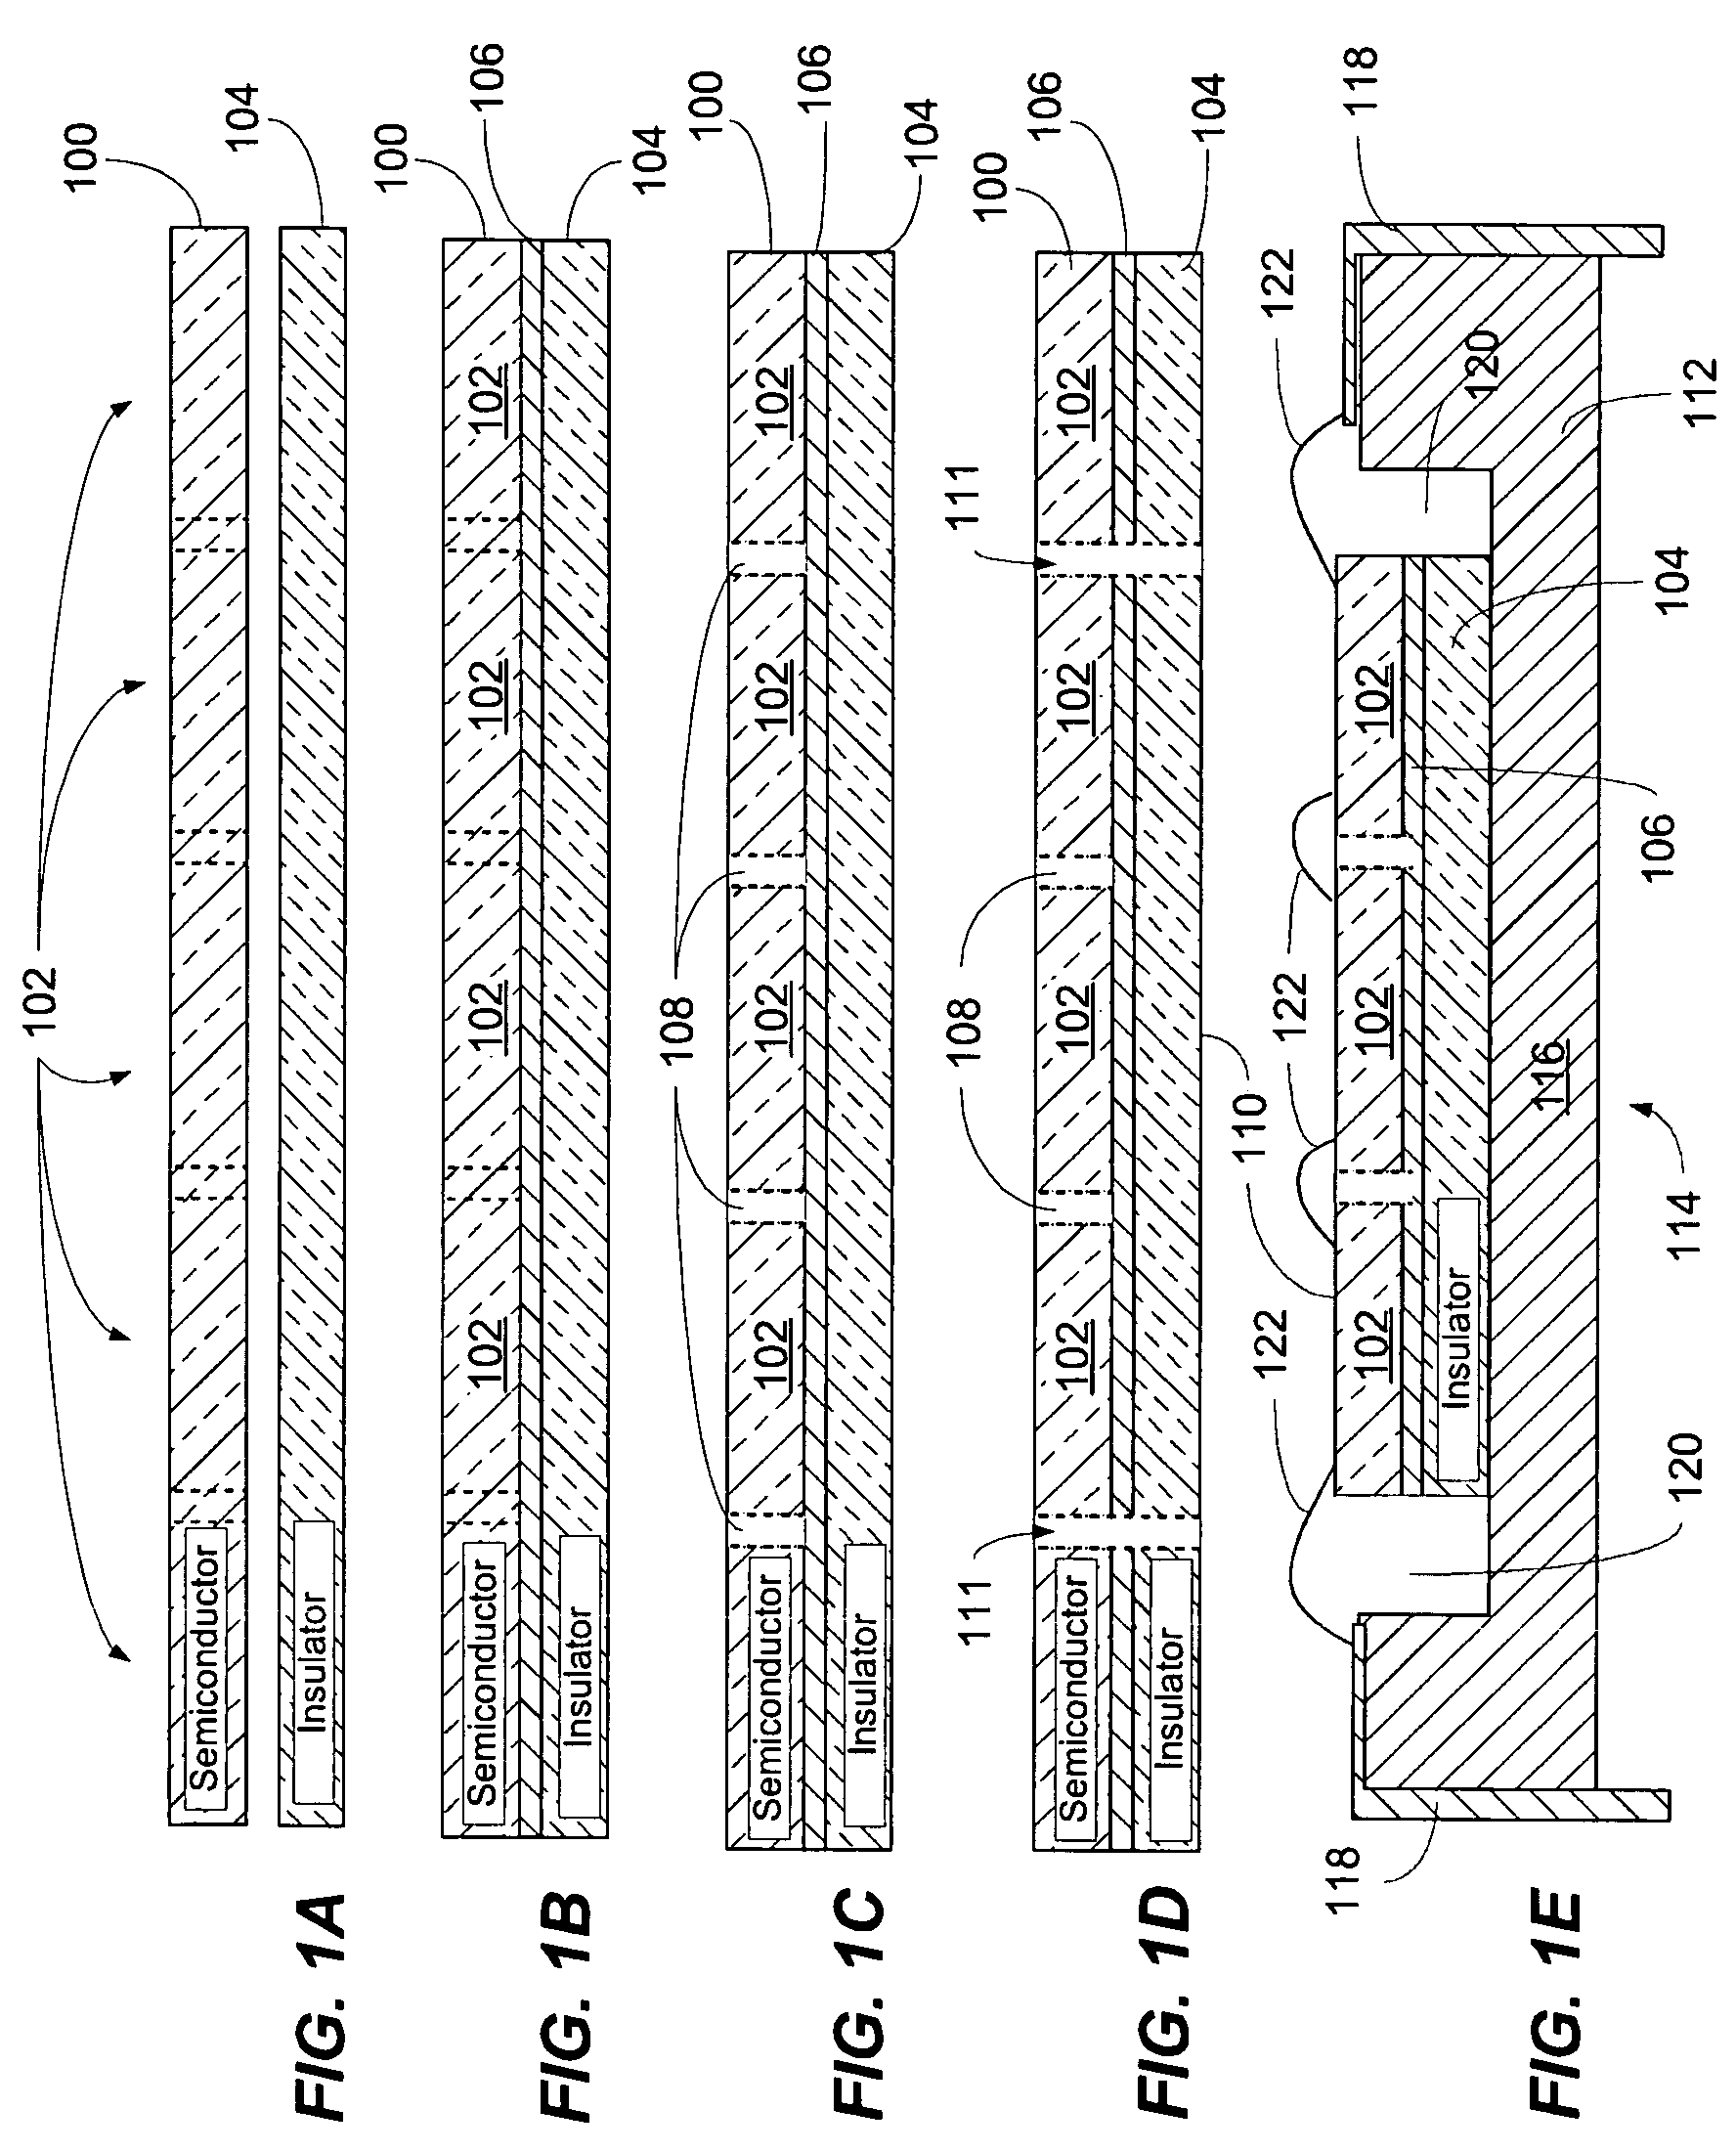 Processes and packaging for high voltage integrated circuits, electronic devices, and circuits